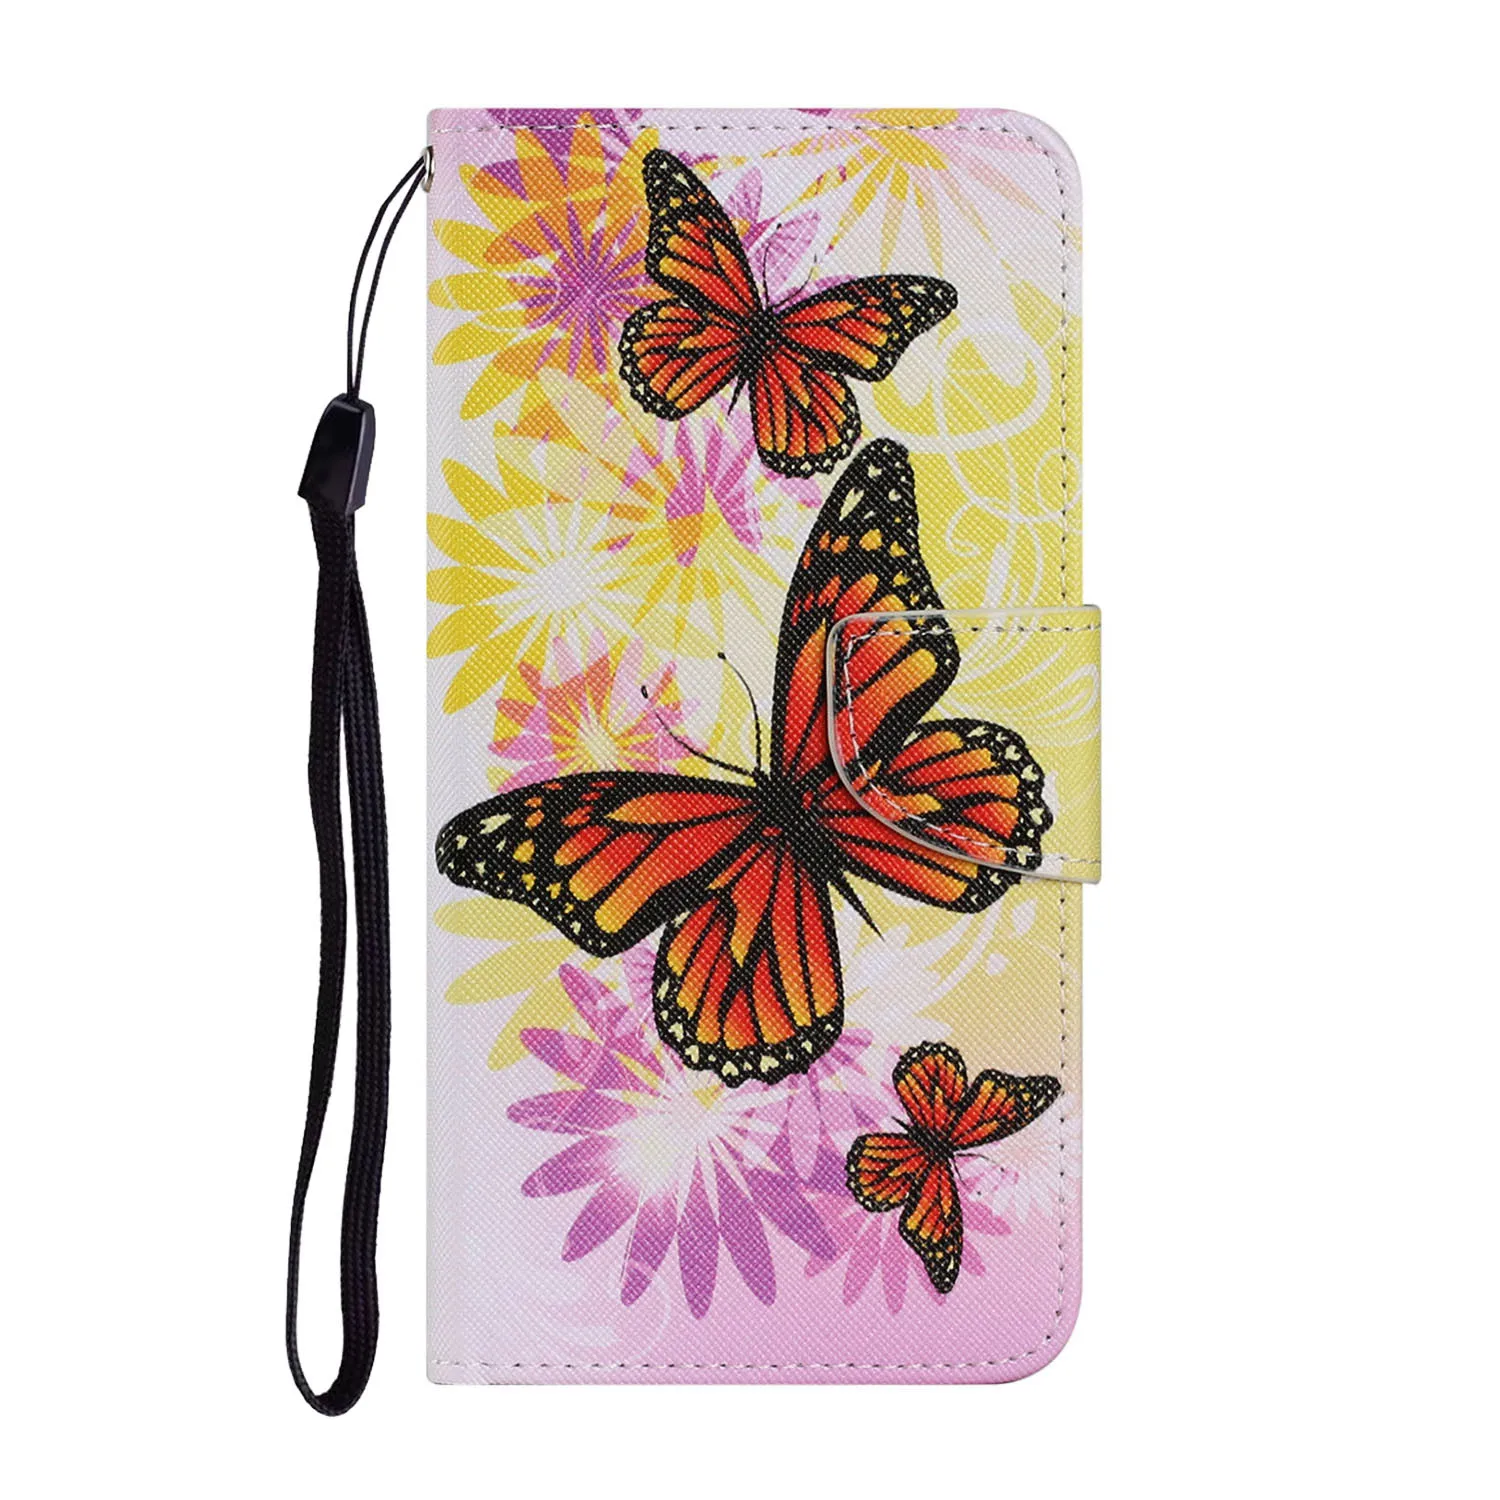 Beautiful Butterfly Pattern Phone Case For Xiaomi Mi 10T Lite Redmi Note 9 9S 9A 9C 8 8T 8A 7A 7 Pro Flip Leather Card Cover xiaomi leather case case Cases For Xiaomi